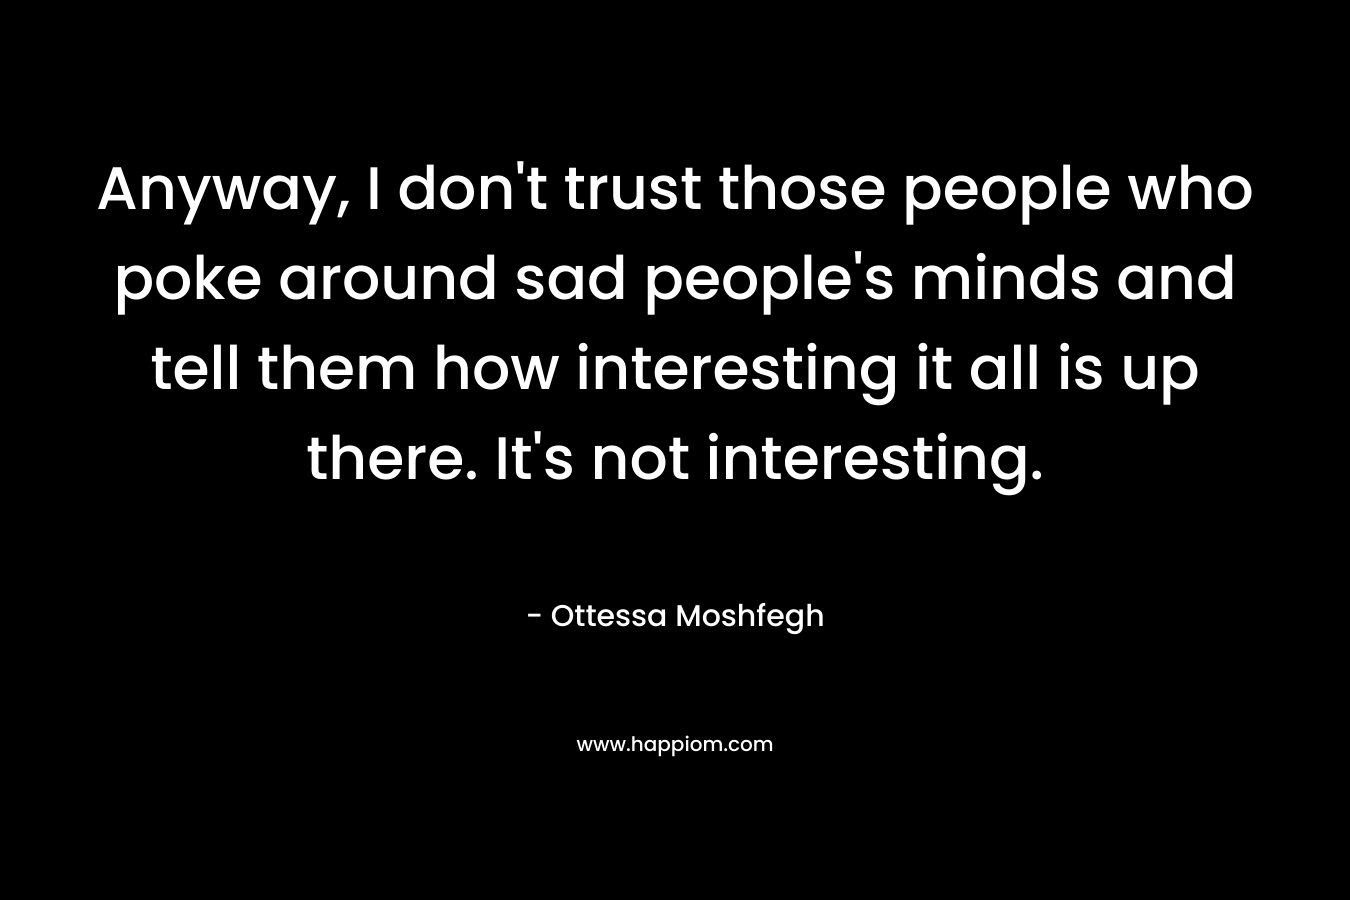 Anyway, I don’t trust those people who poke around sad people’s minds and tell them how interesting it all is up there. It’s not interesting. – Ottessa Moshfegh